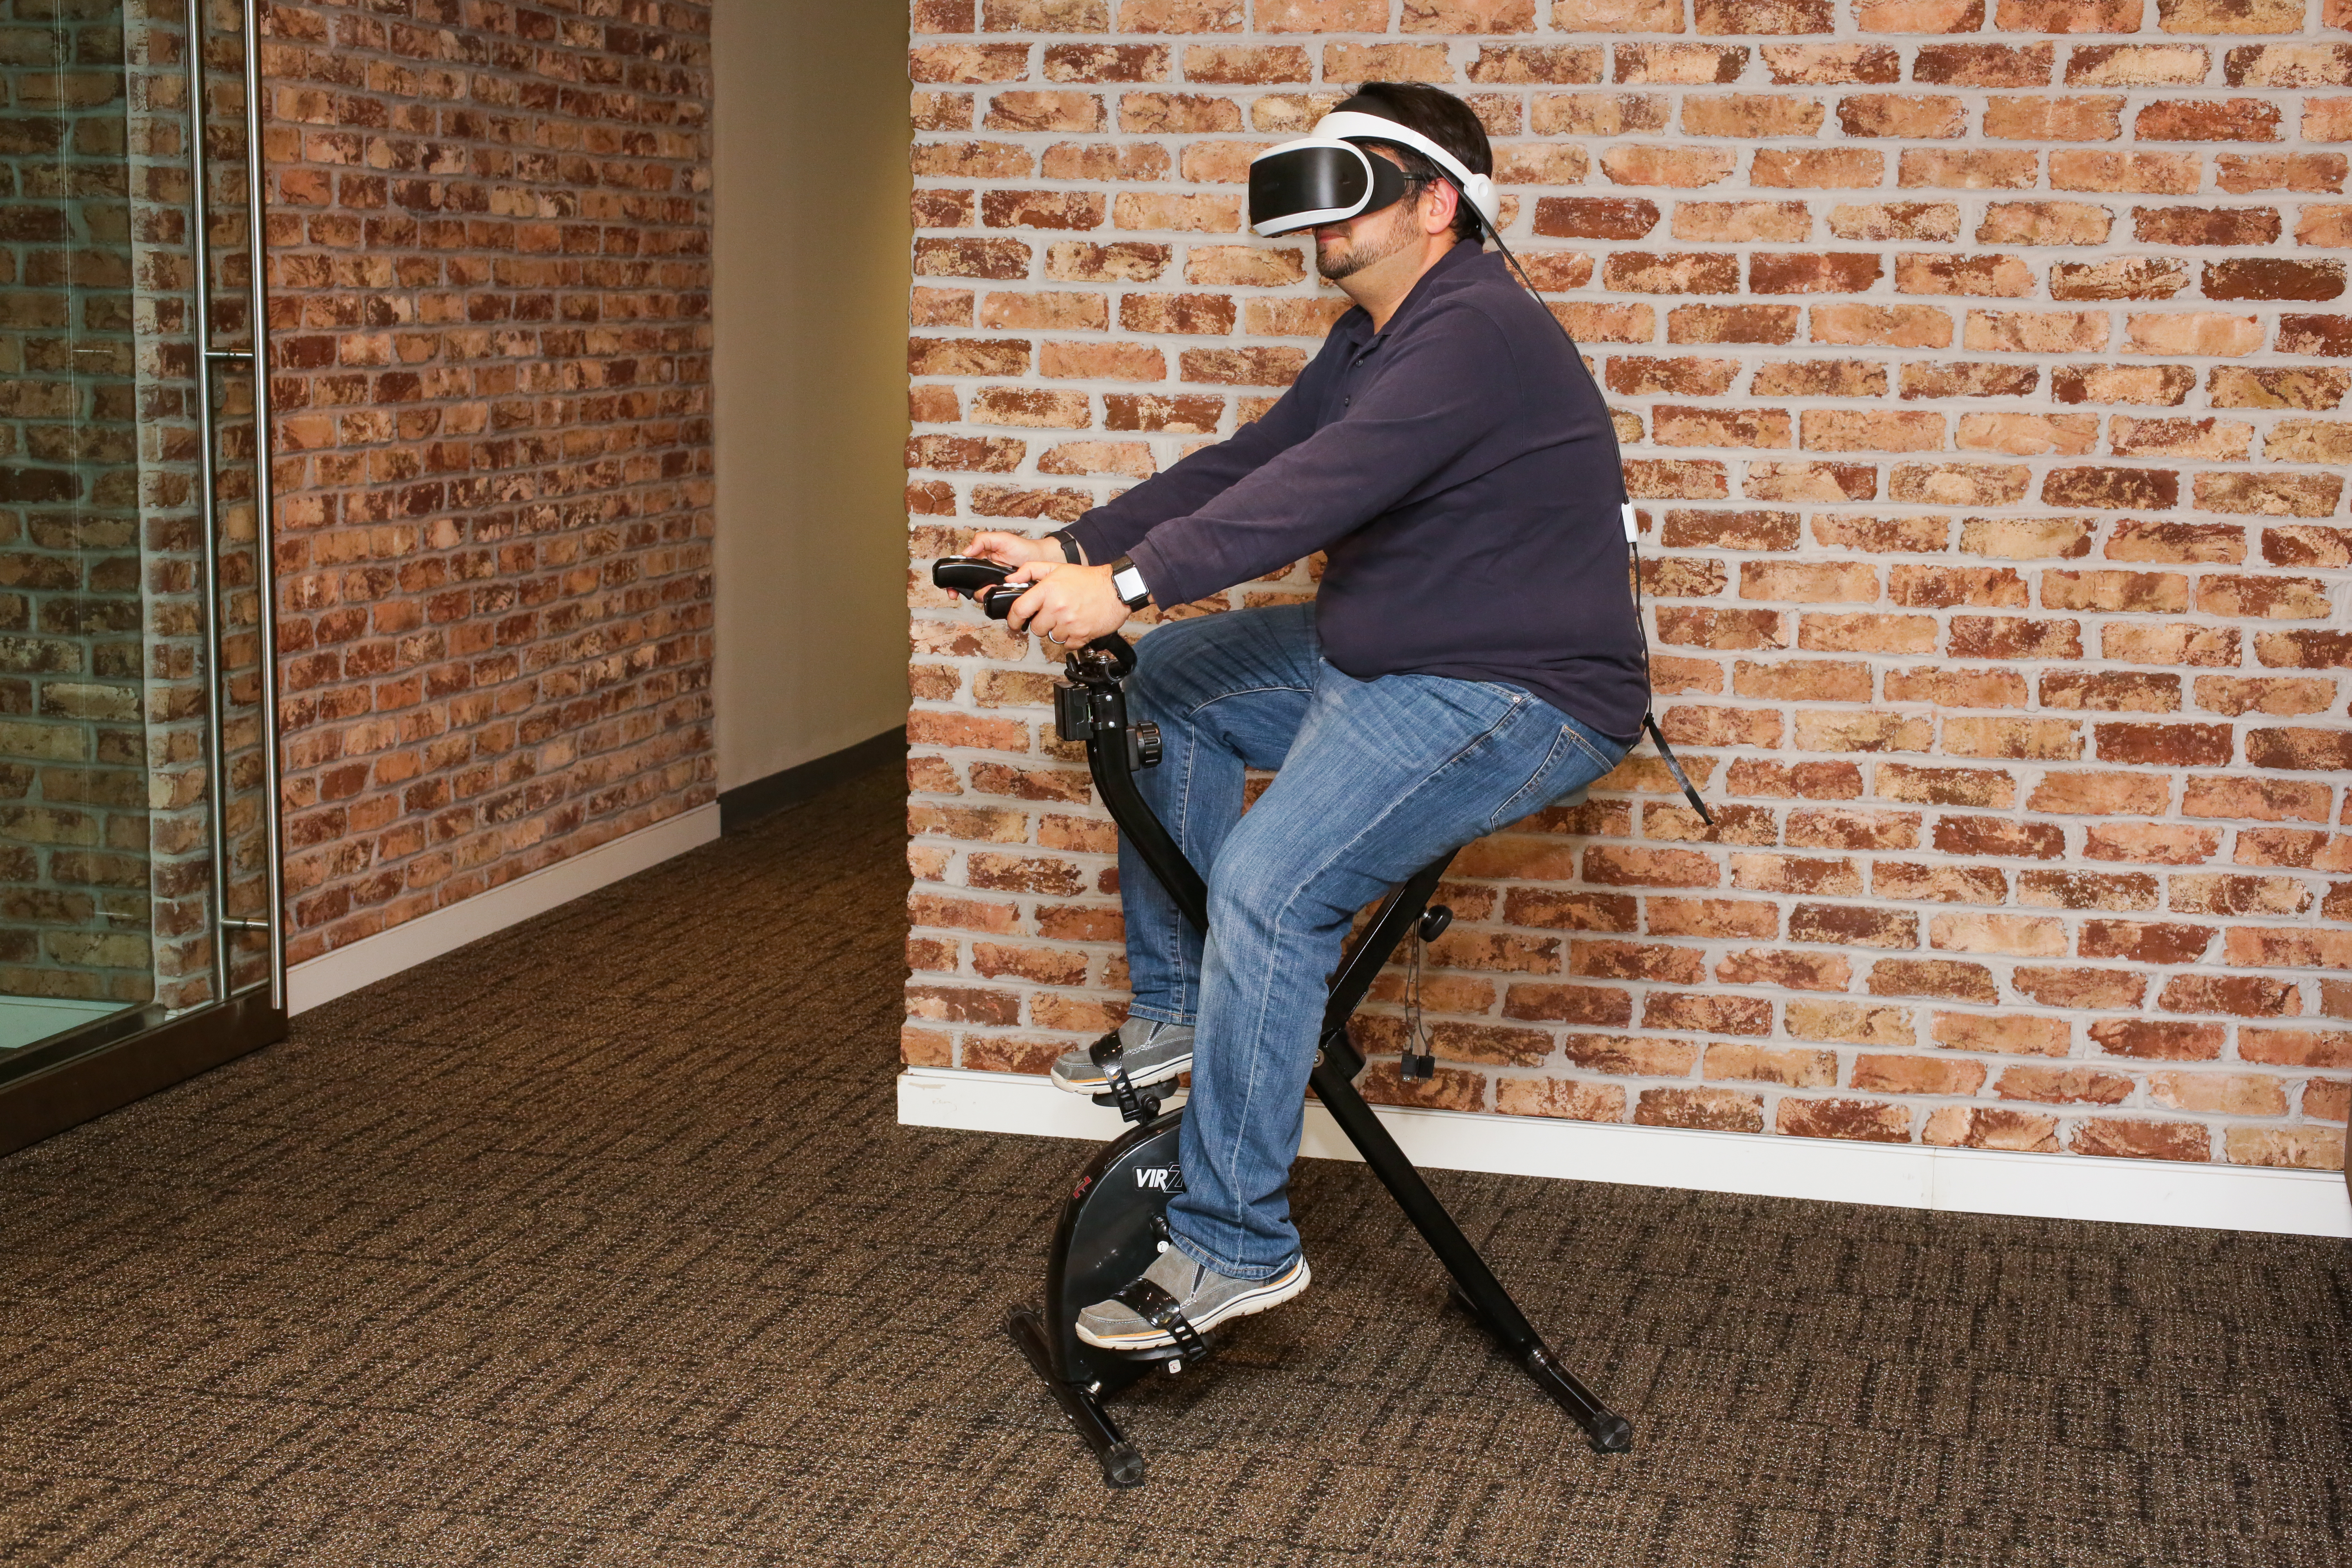 Vr ride. VR Bike. VR Bicycle. VR фитнес. Ride out.